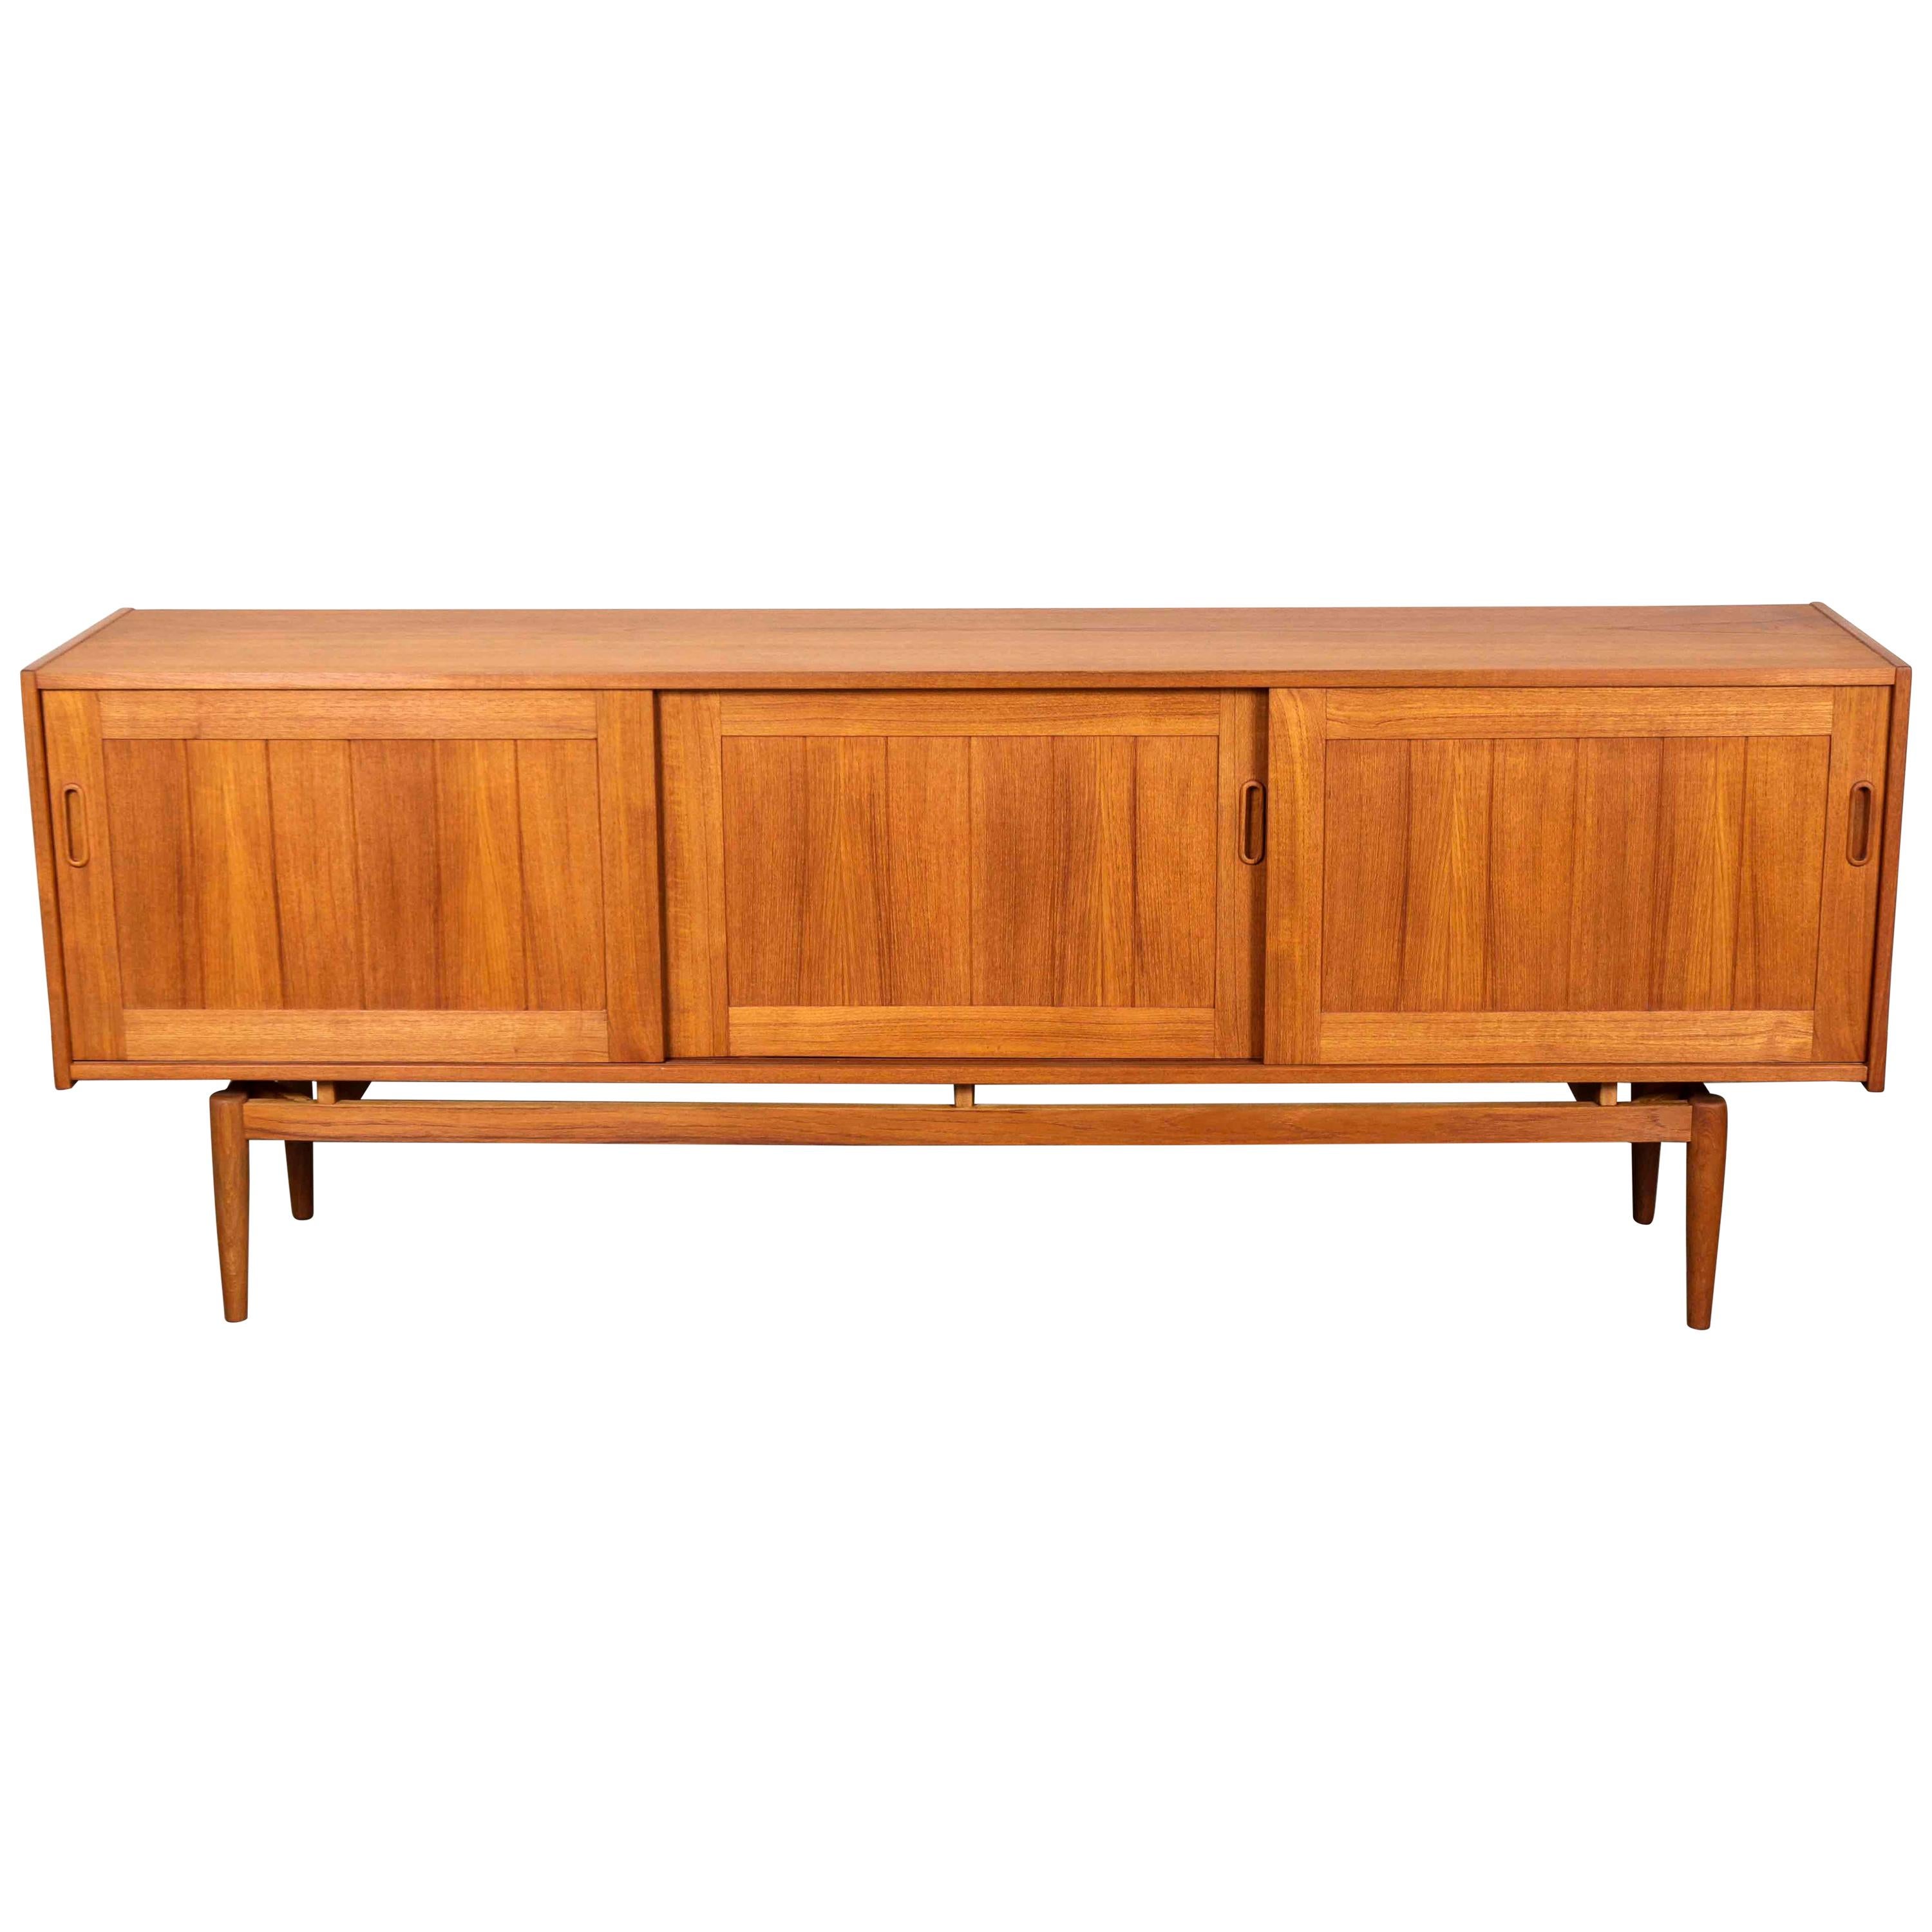 Long and Low Swedish Teak Panel Front Sideboard with 3 Sliding Doors